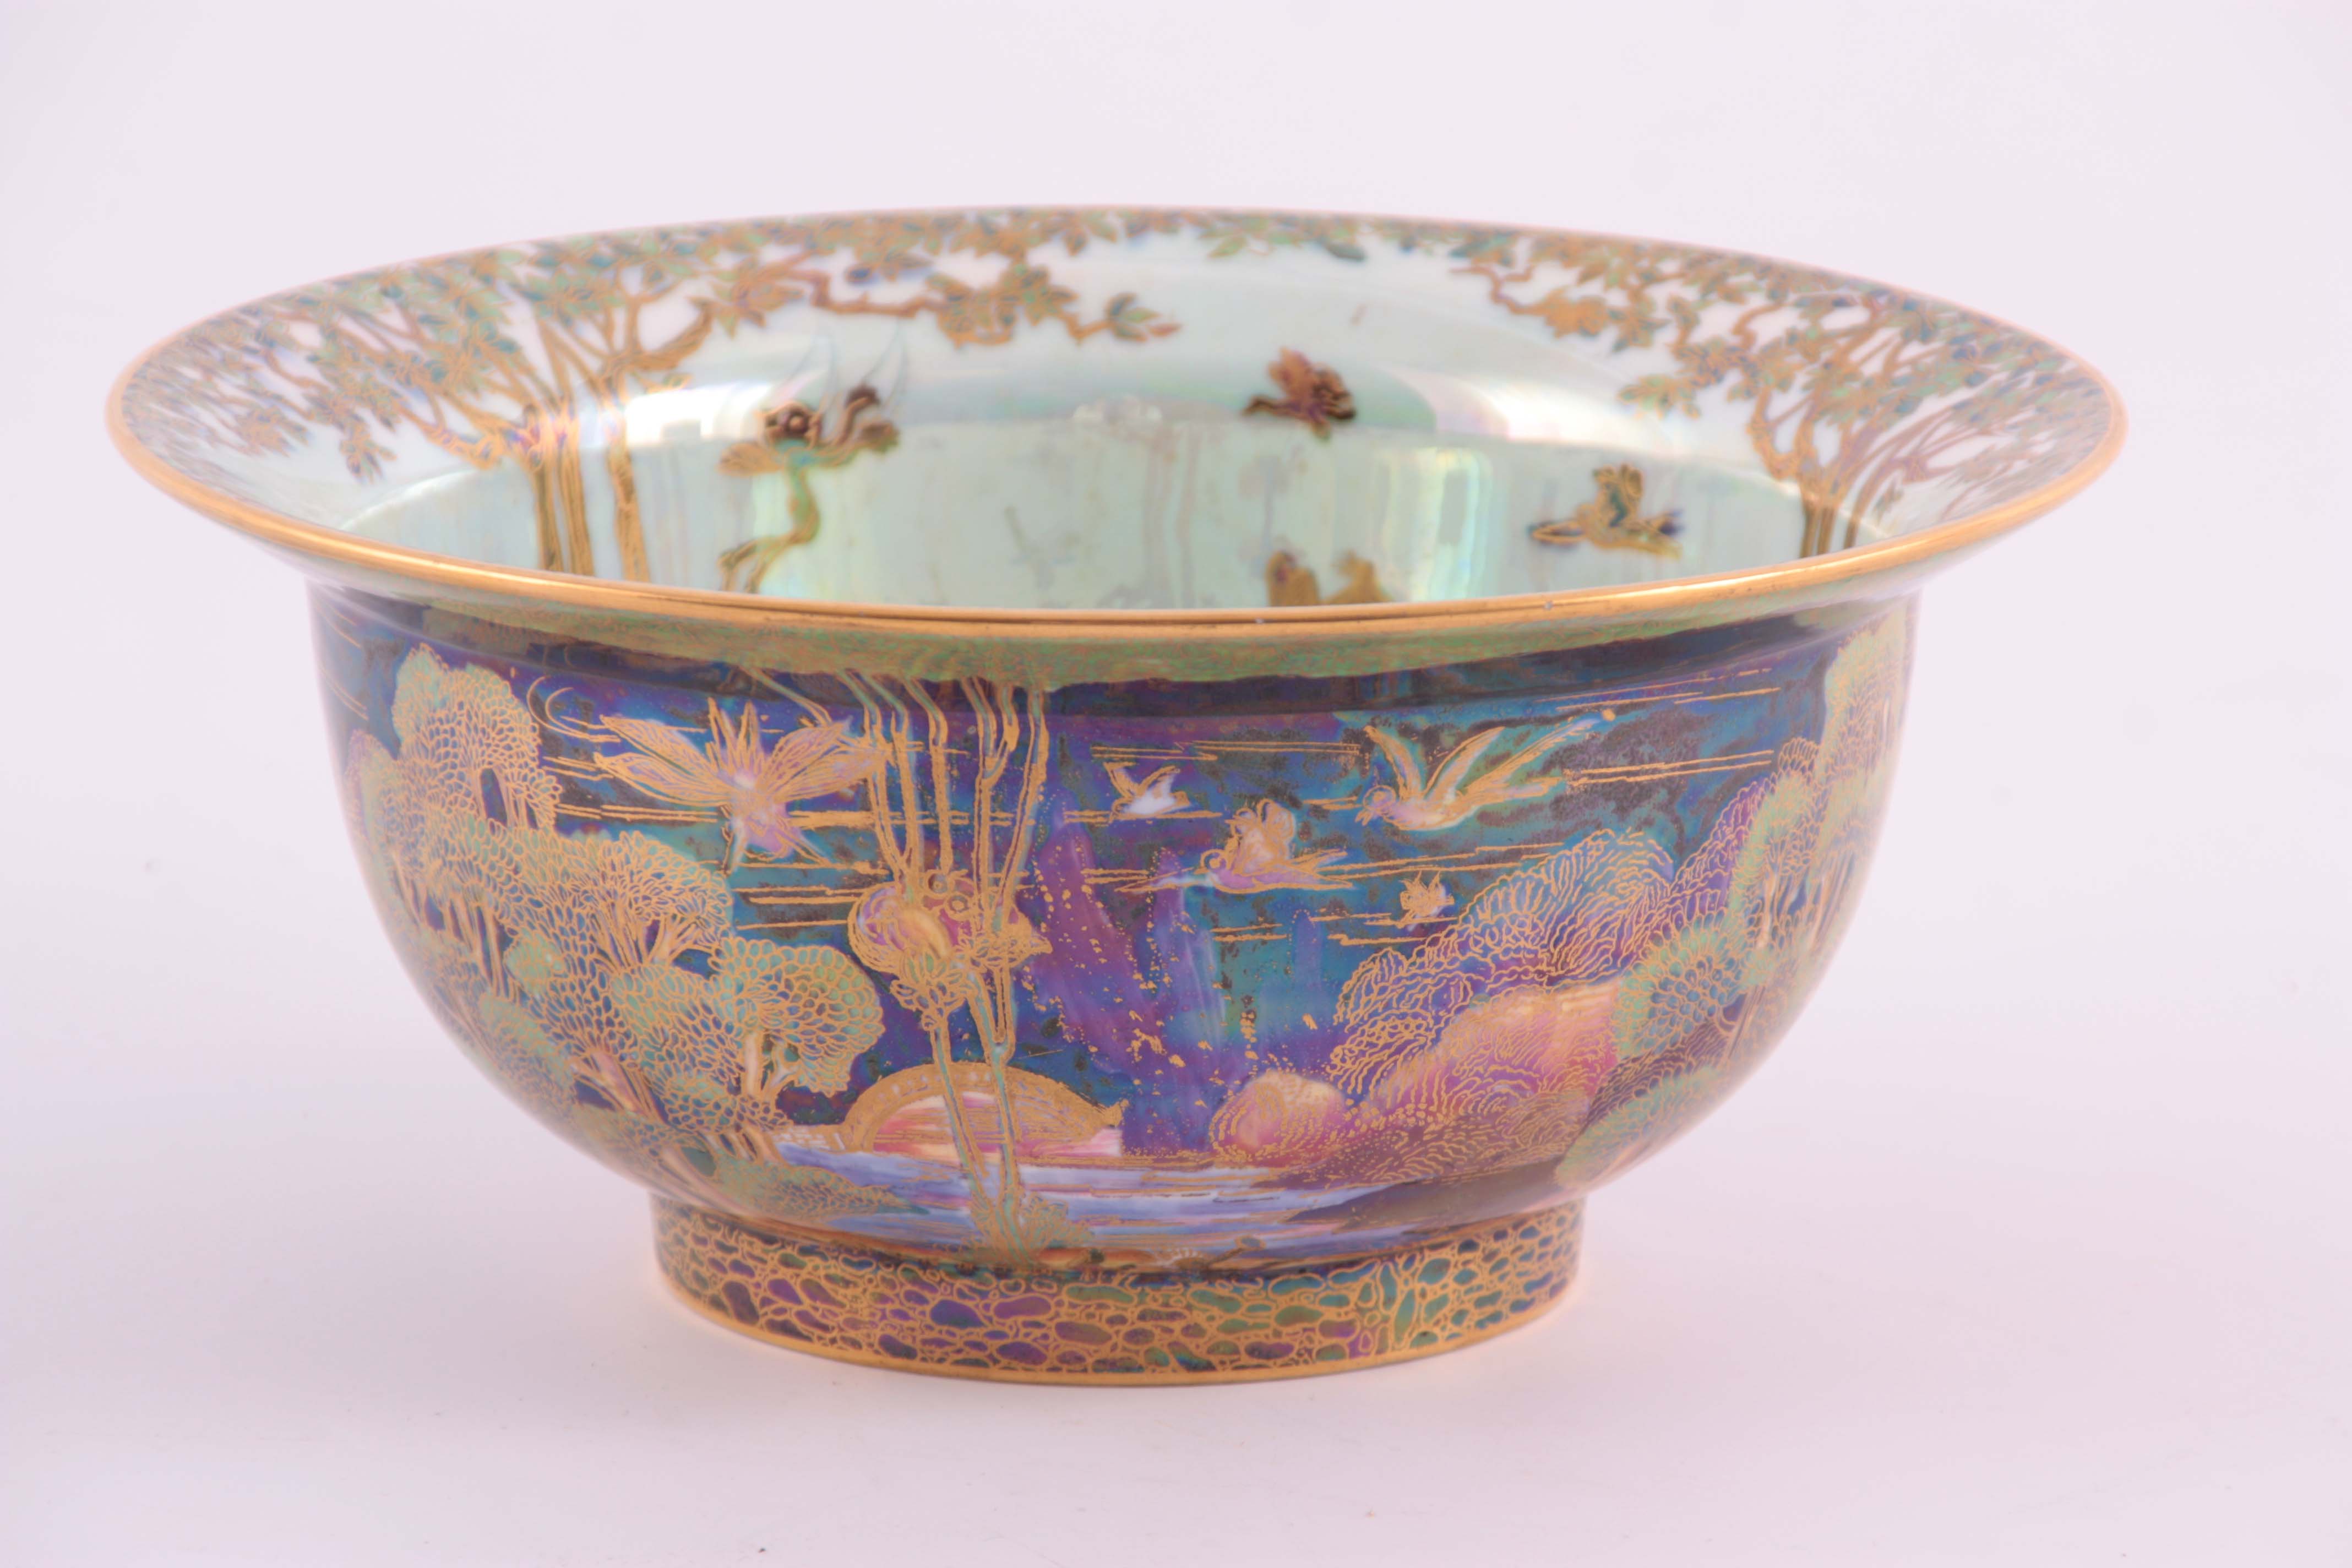 A FINE WEDGWOOD FAIRYLAND LUSTRE FOOTED BOWL WITH EVERTED RIM AFTER DESIGNS BY DAISY MAKEIG JONES - Image 2 of 7